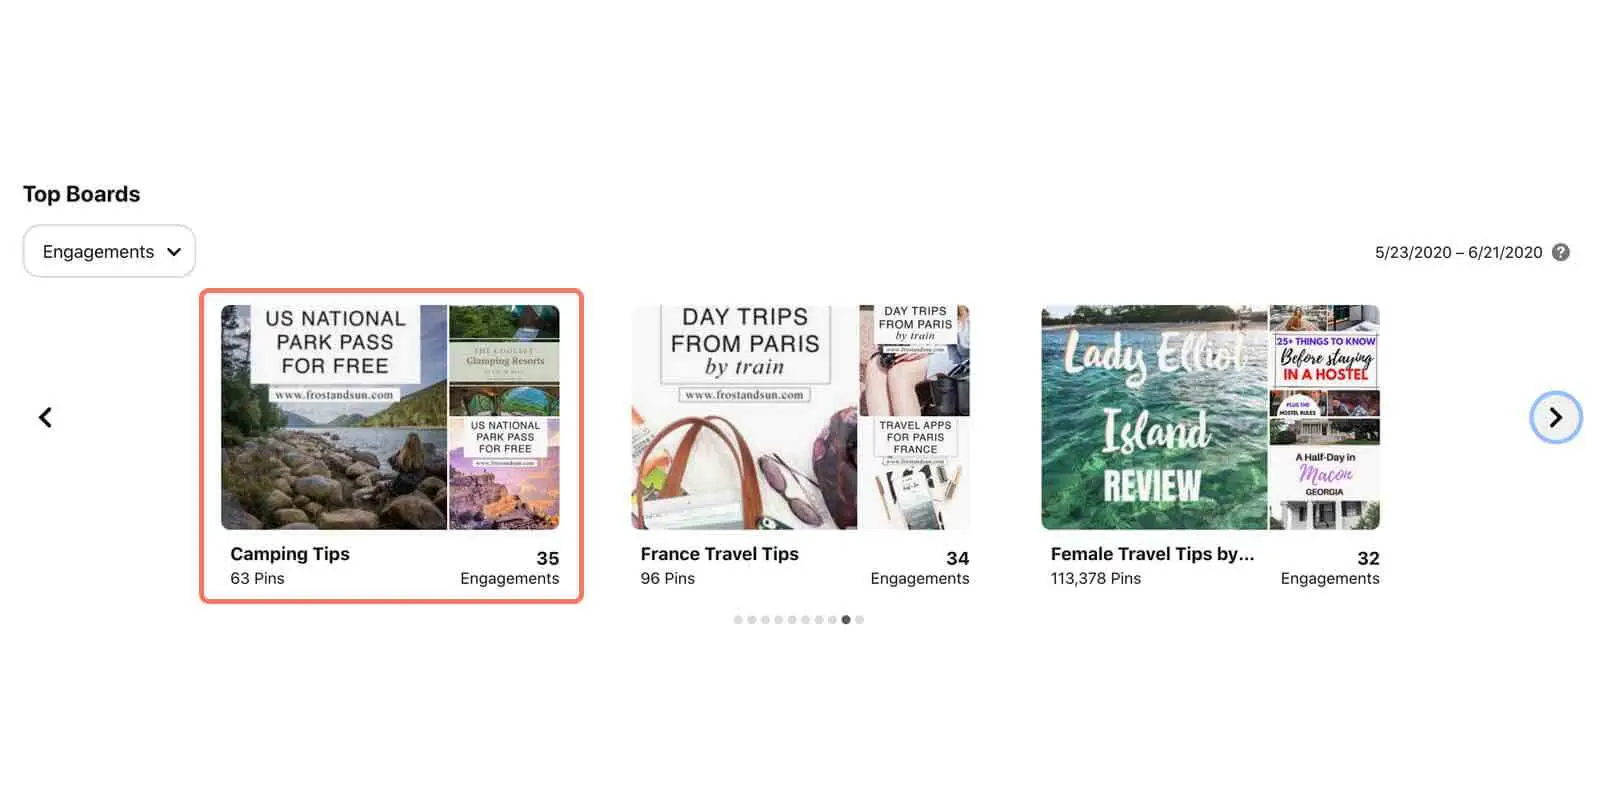 Screenshot of Top Boards in Pinterest Audience Insights. Three boards with low engagement are shown: Camping tips, France travel tips, and Female Travel Tips by Tourlina.